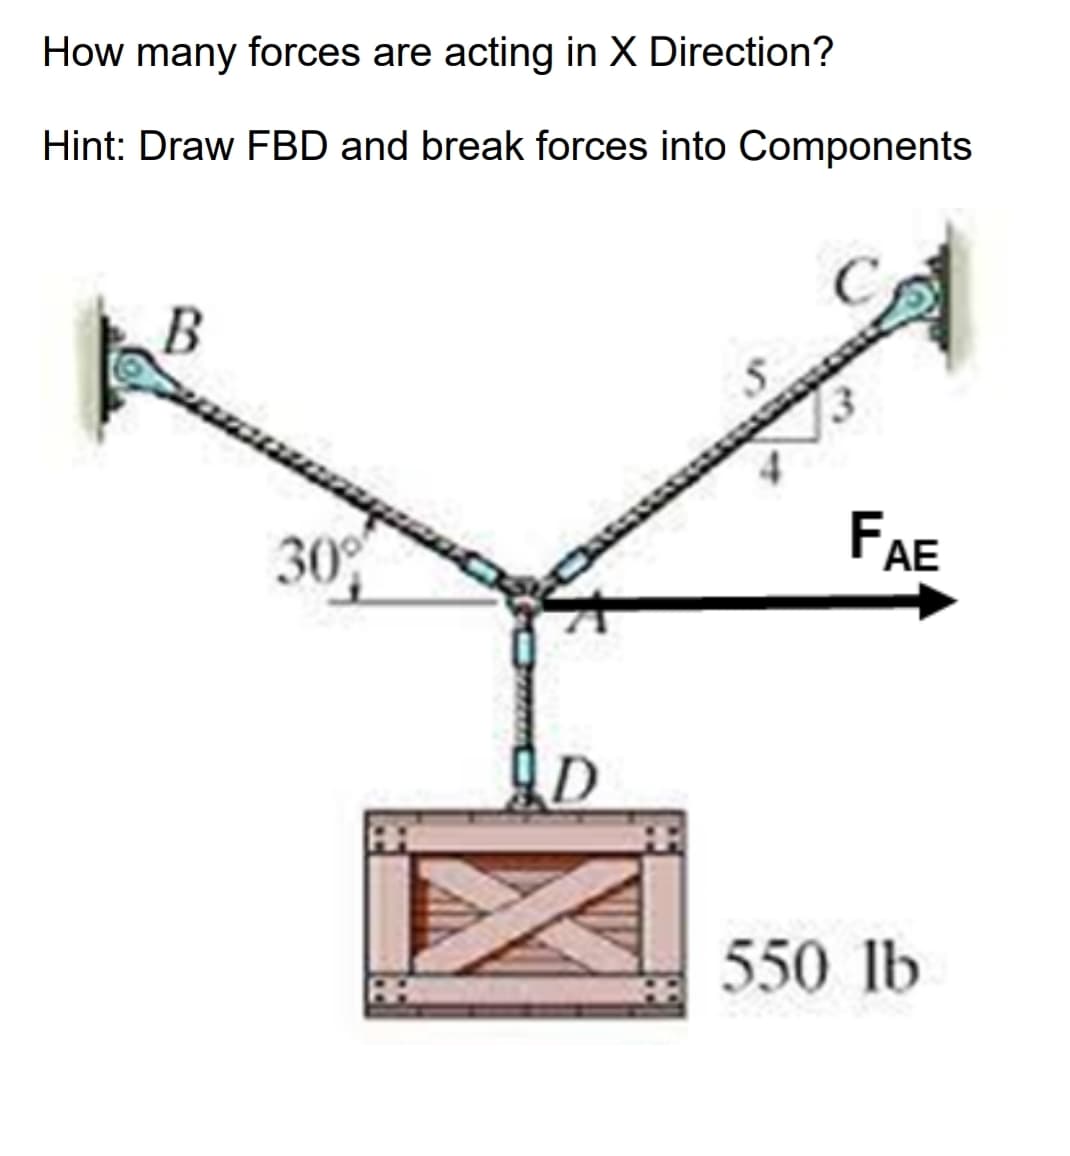 How many forces are acting in X Direction?
Hint: Draw FBD and break forces into Components
B
30%
FAE
550 lb